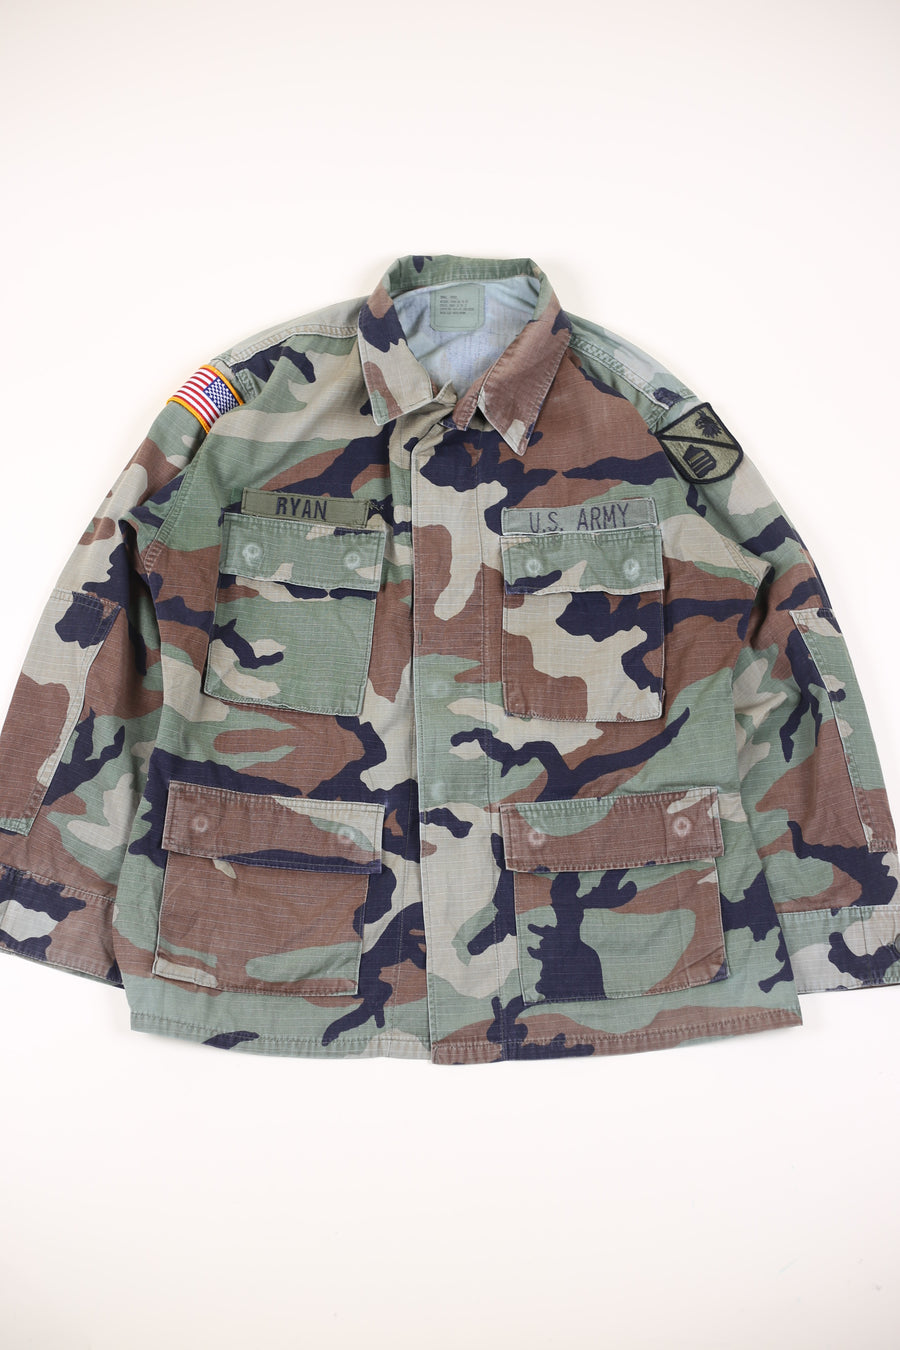 Giacca camouflage  Bdu US Army  - M - ( PERSONALIZZABILE )